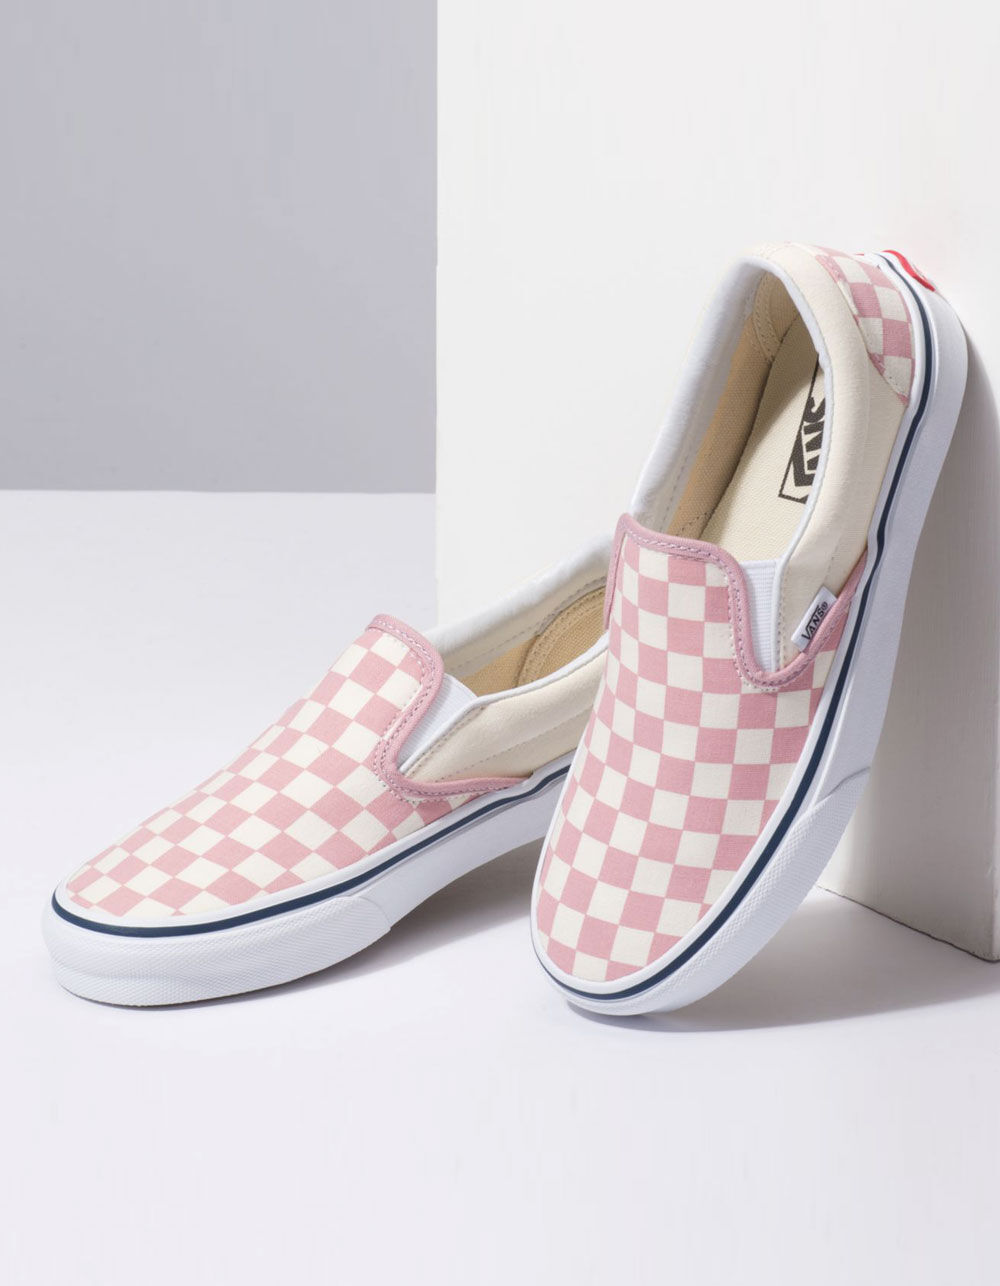 Classic Slip On Checkerboard Etherea Brown True White By Vans | lupon ...